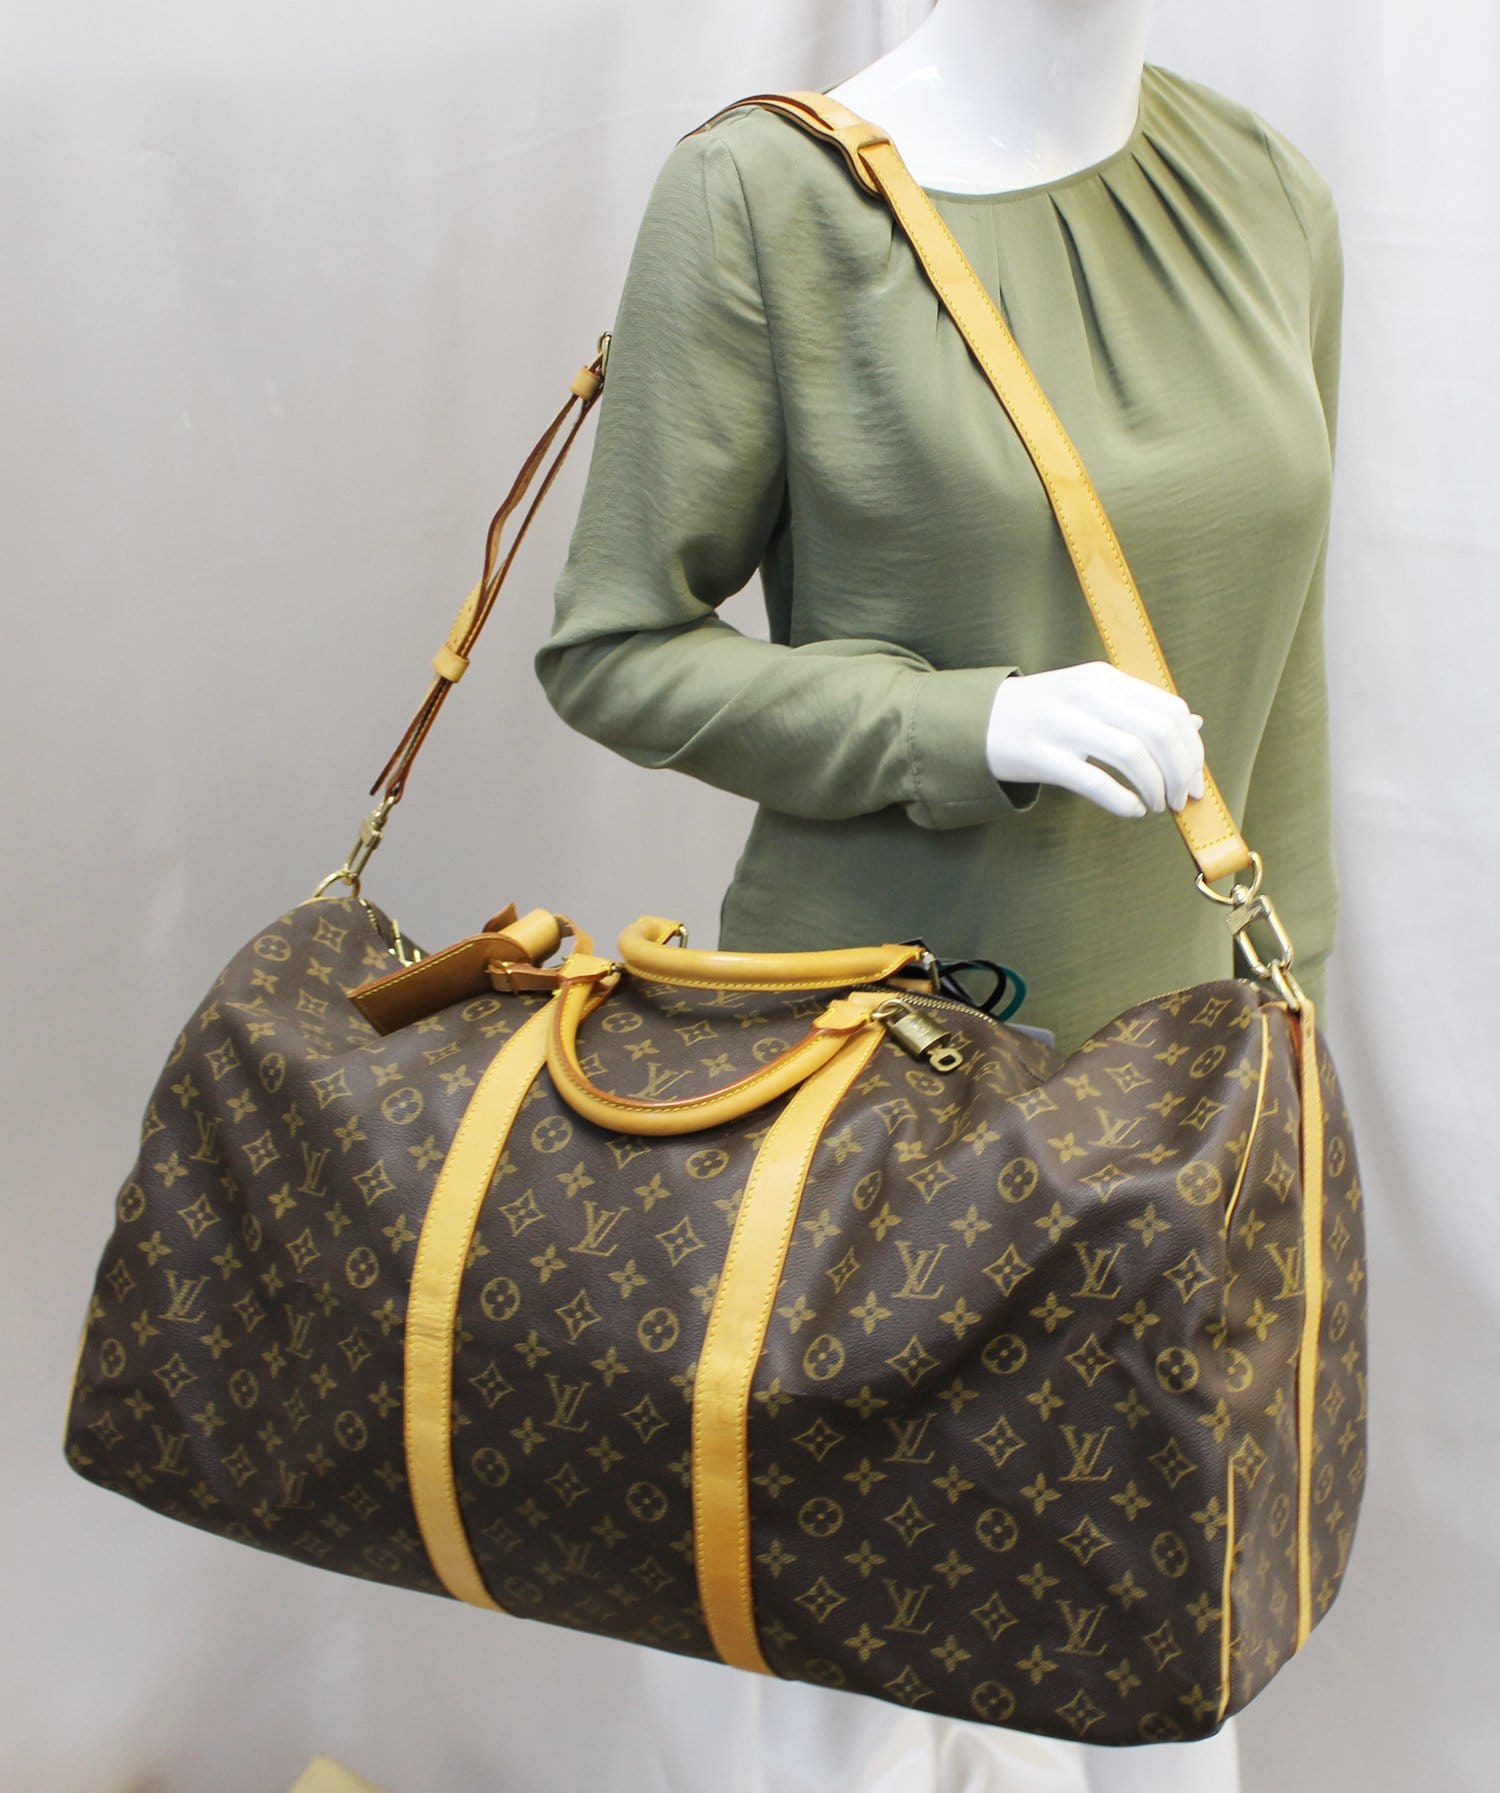 Louis Vuitton 2000 pre-owned Keepall Bandouliere 60 two-way Travel Bag -  Farfetch